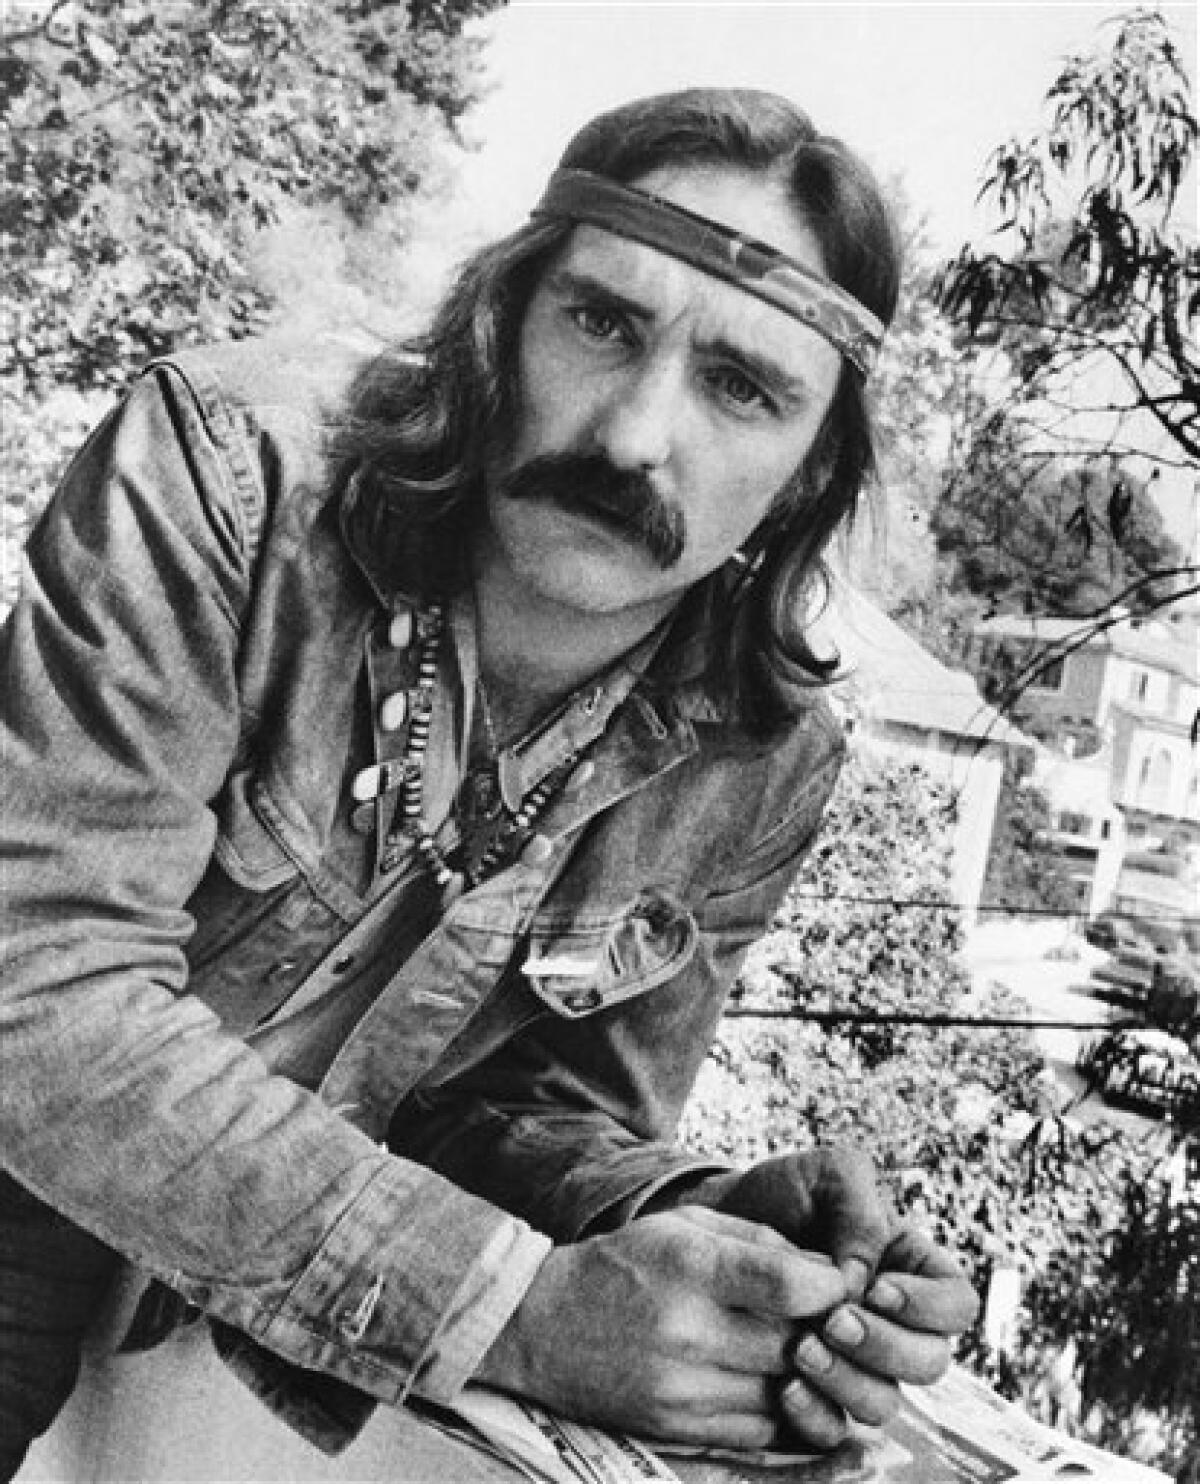 FILE - In a Oct. 1971 file photo, director-actor Dennis Hopper poses in Hollywood, Ca. Hopper died of prostate cancer aged 74 a friend of the family told the press. (AP Photo, File)